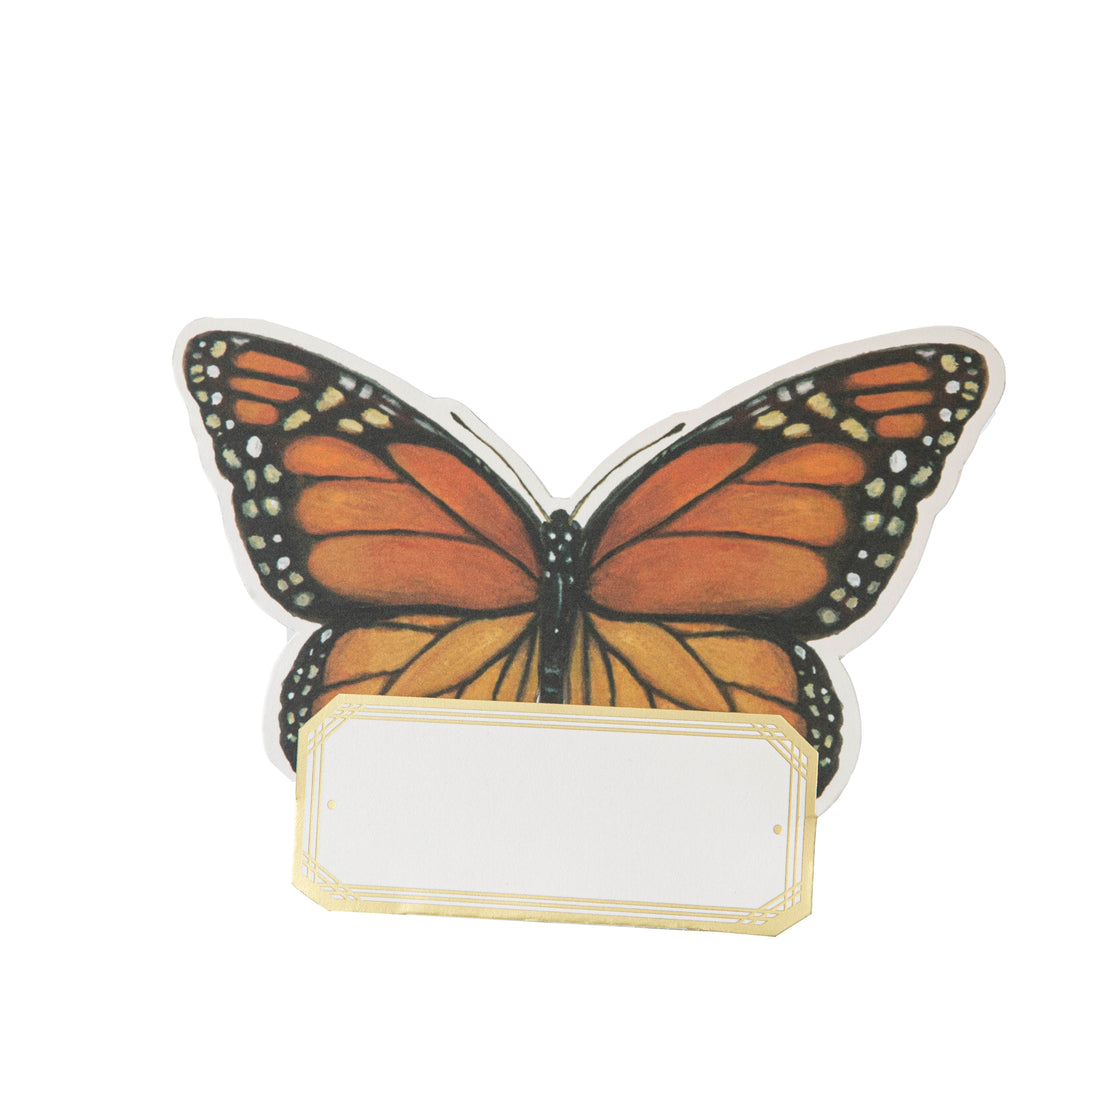 A die-cut freestanding place card featuring a gorgeous illustration of a monarch butterfly at the top, and a gold-framed open white rectangle at the bottom for personalization. 